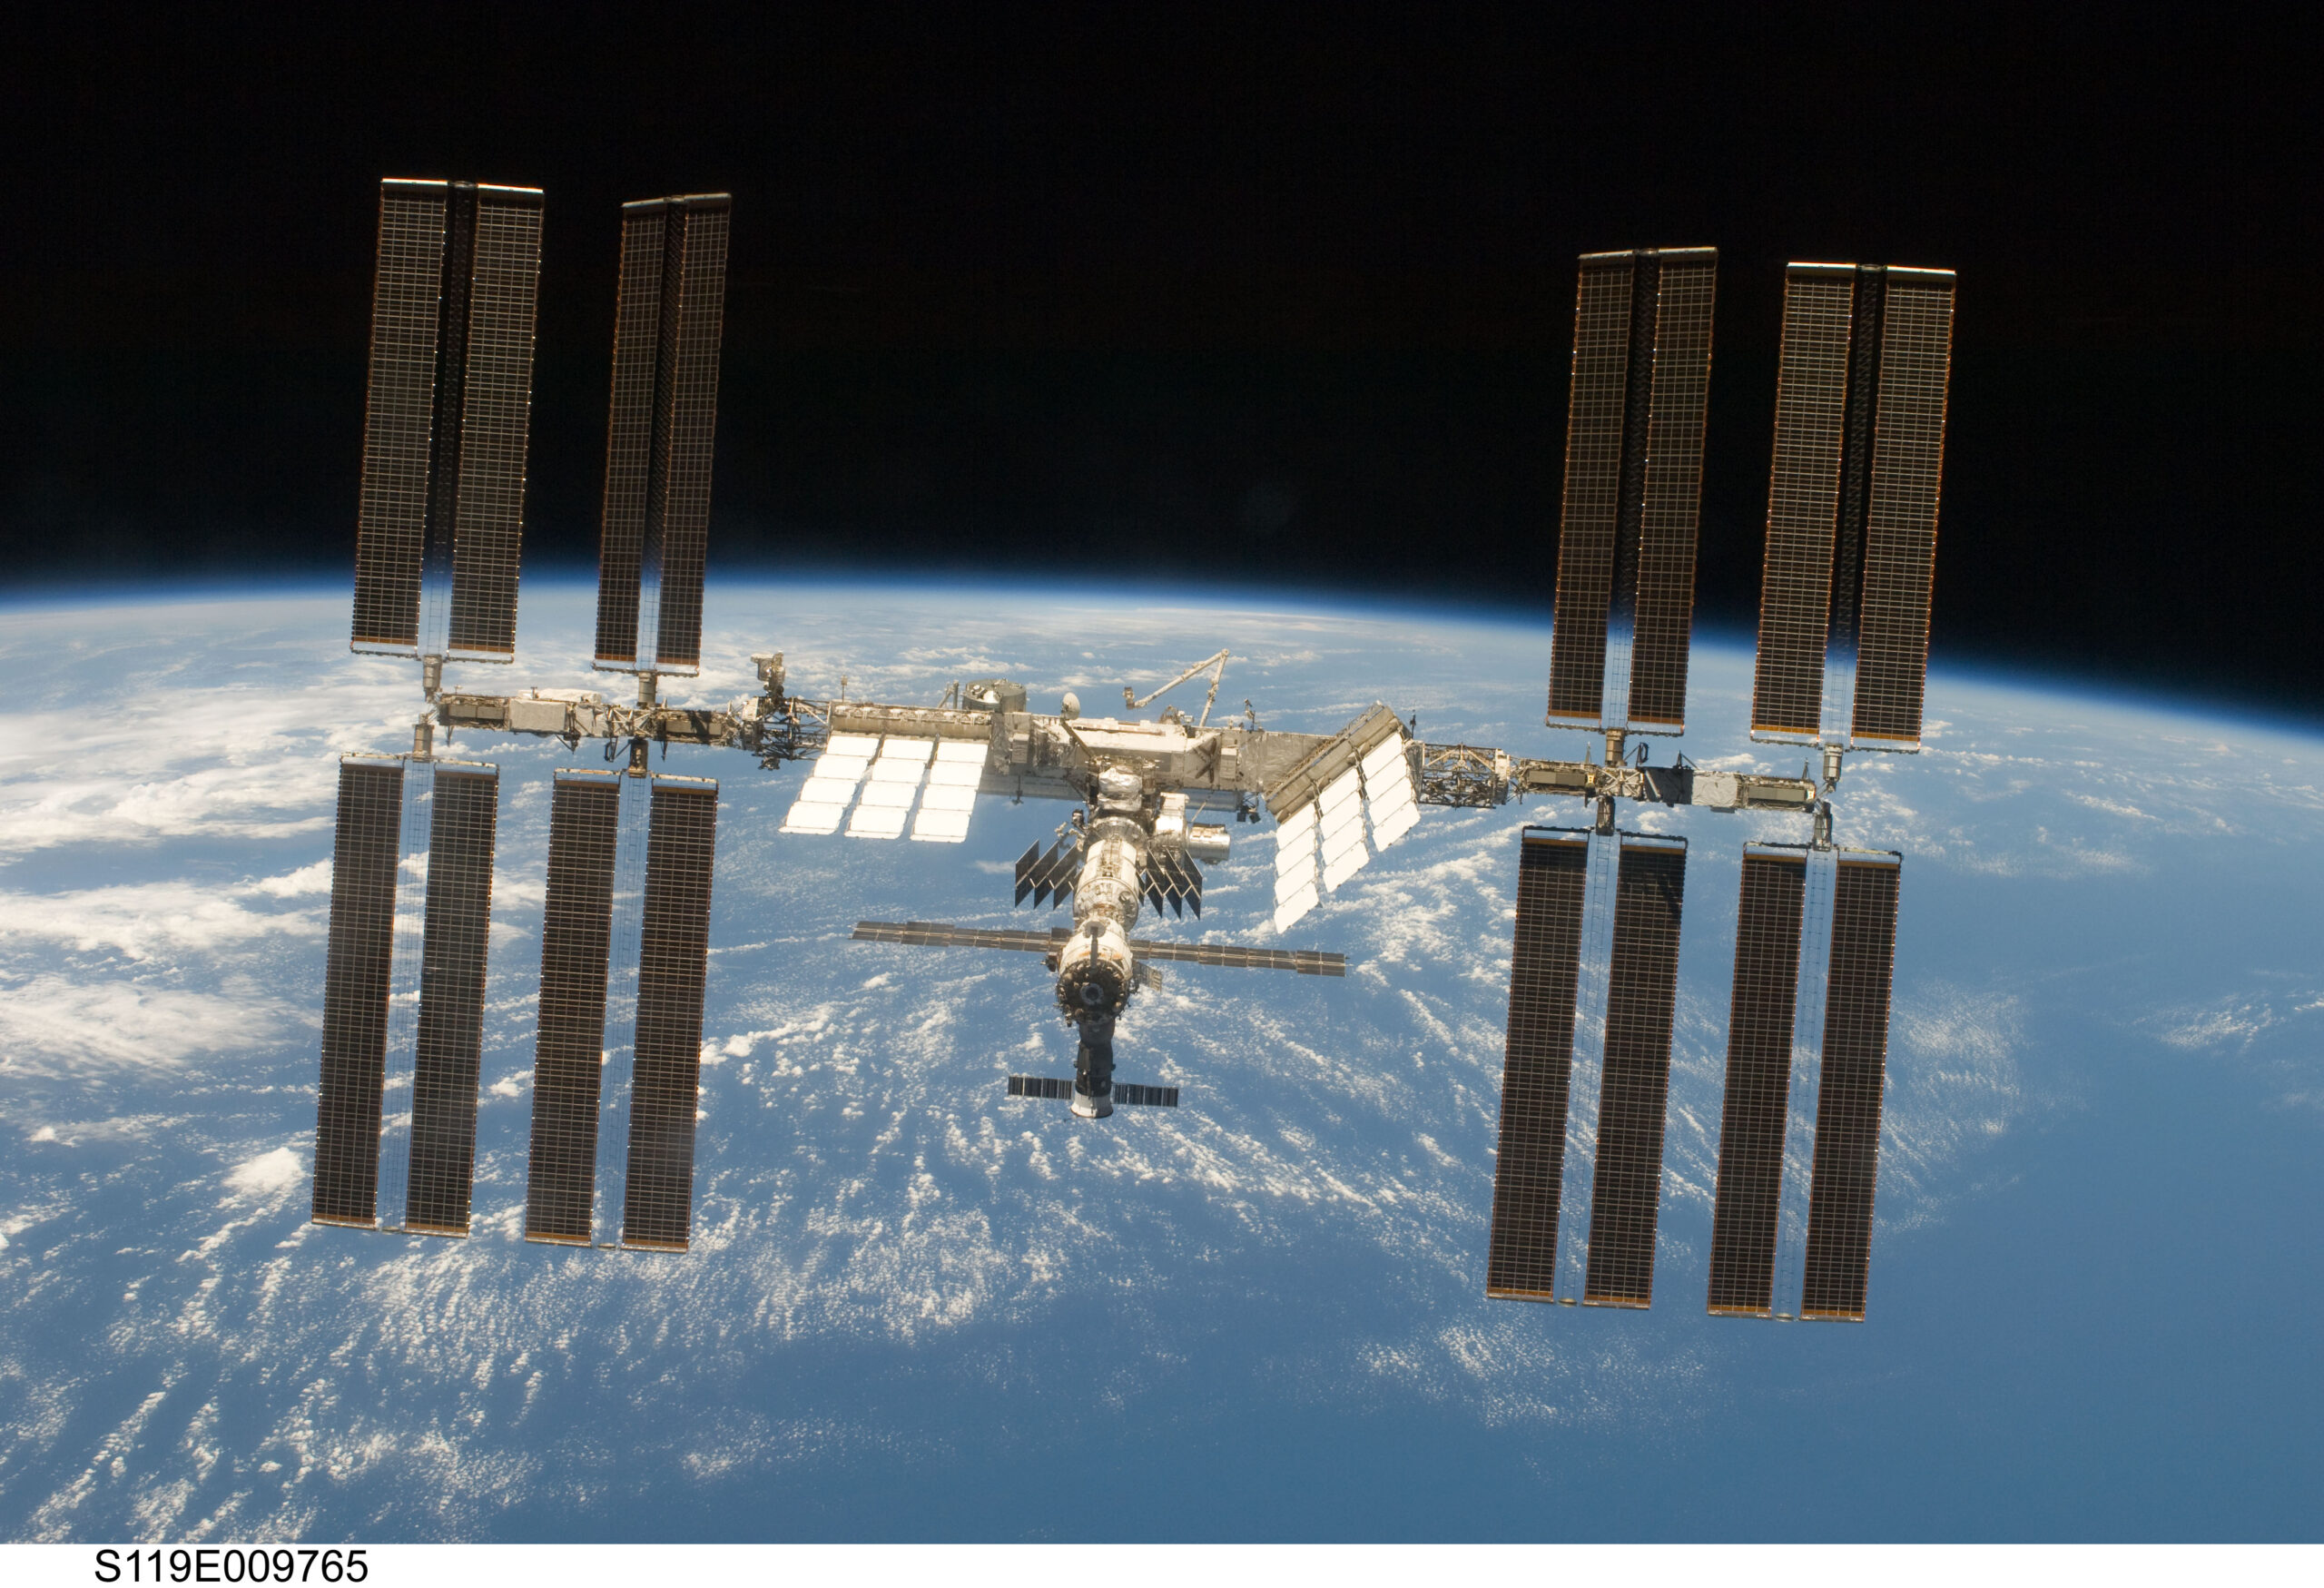 NASA Plans to Put Nonprofit Group In Charge Of International Space Station Experiments